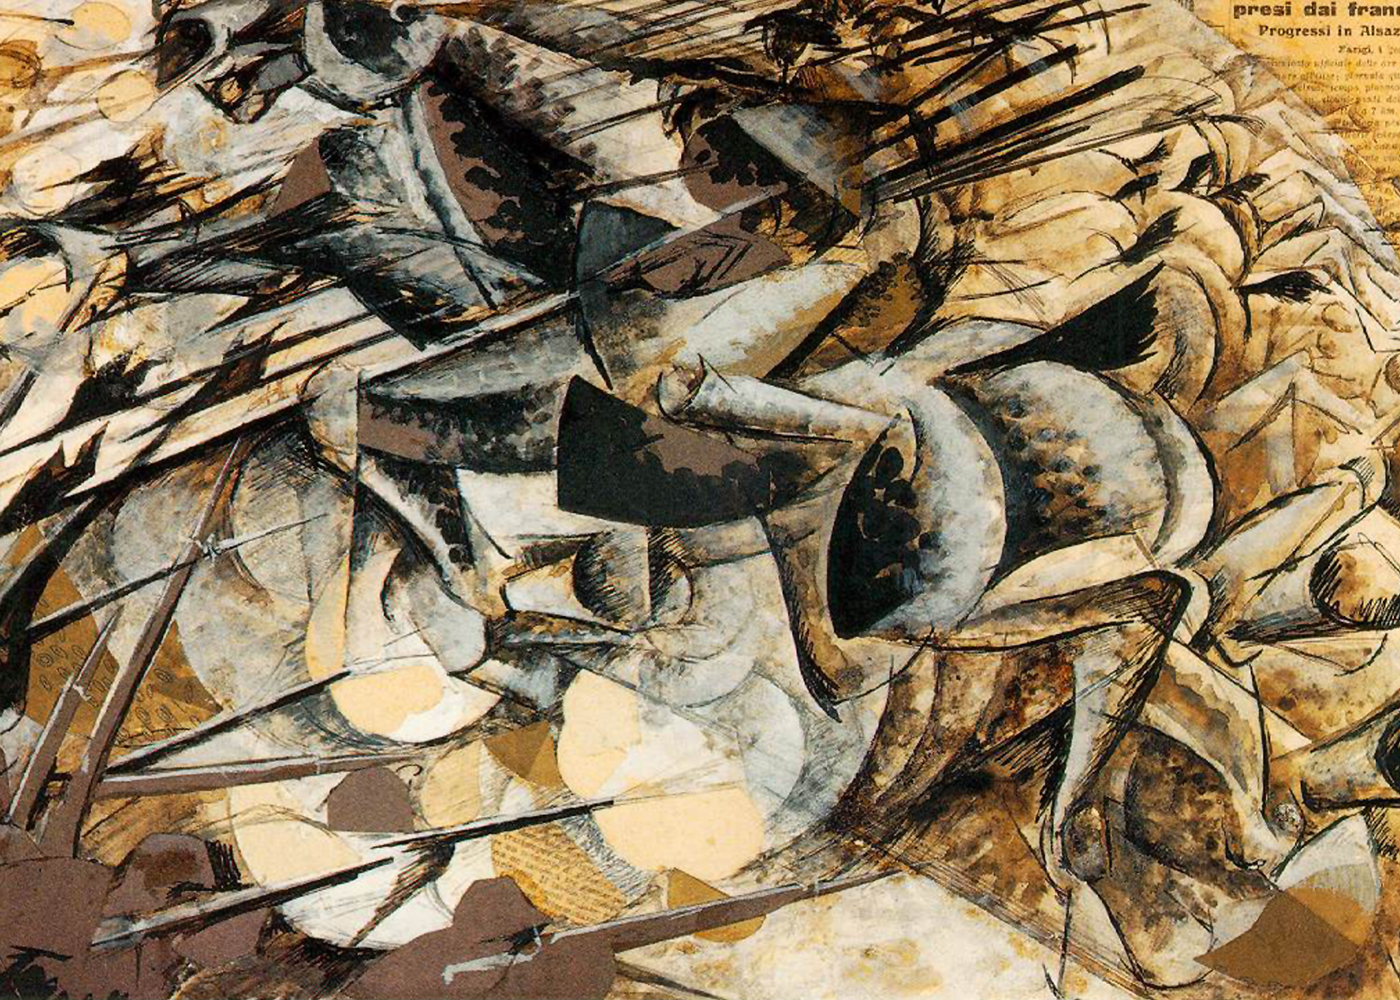 Charge of the Lancers by Umberto Boccioni - 1915 - 50 x 32 cm Private Sammlung